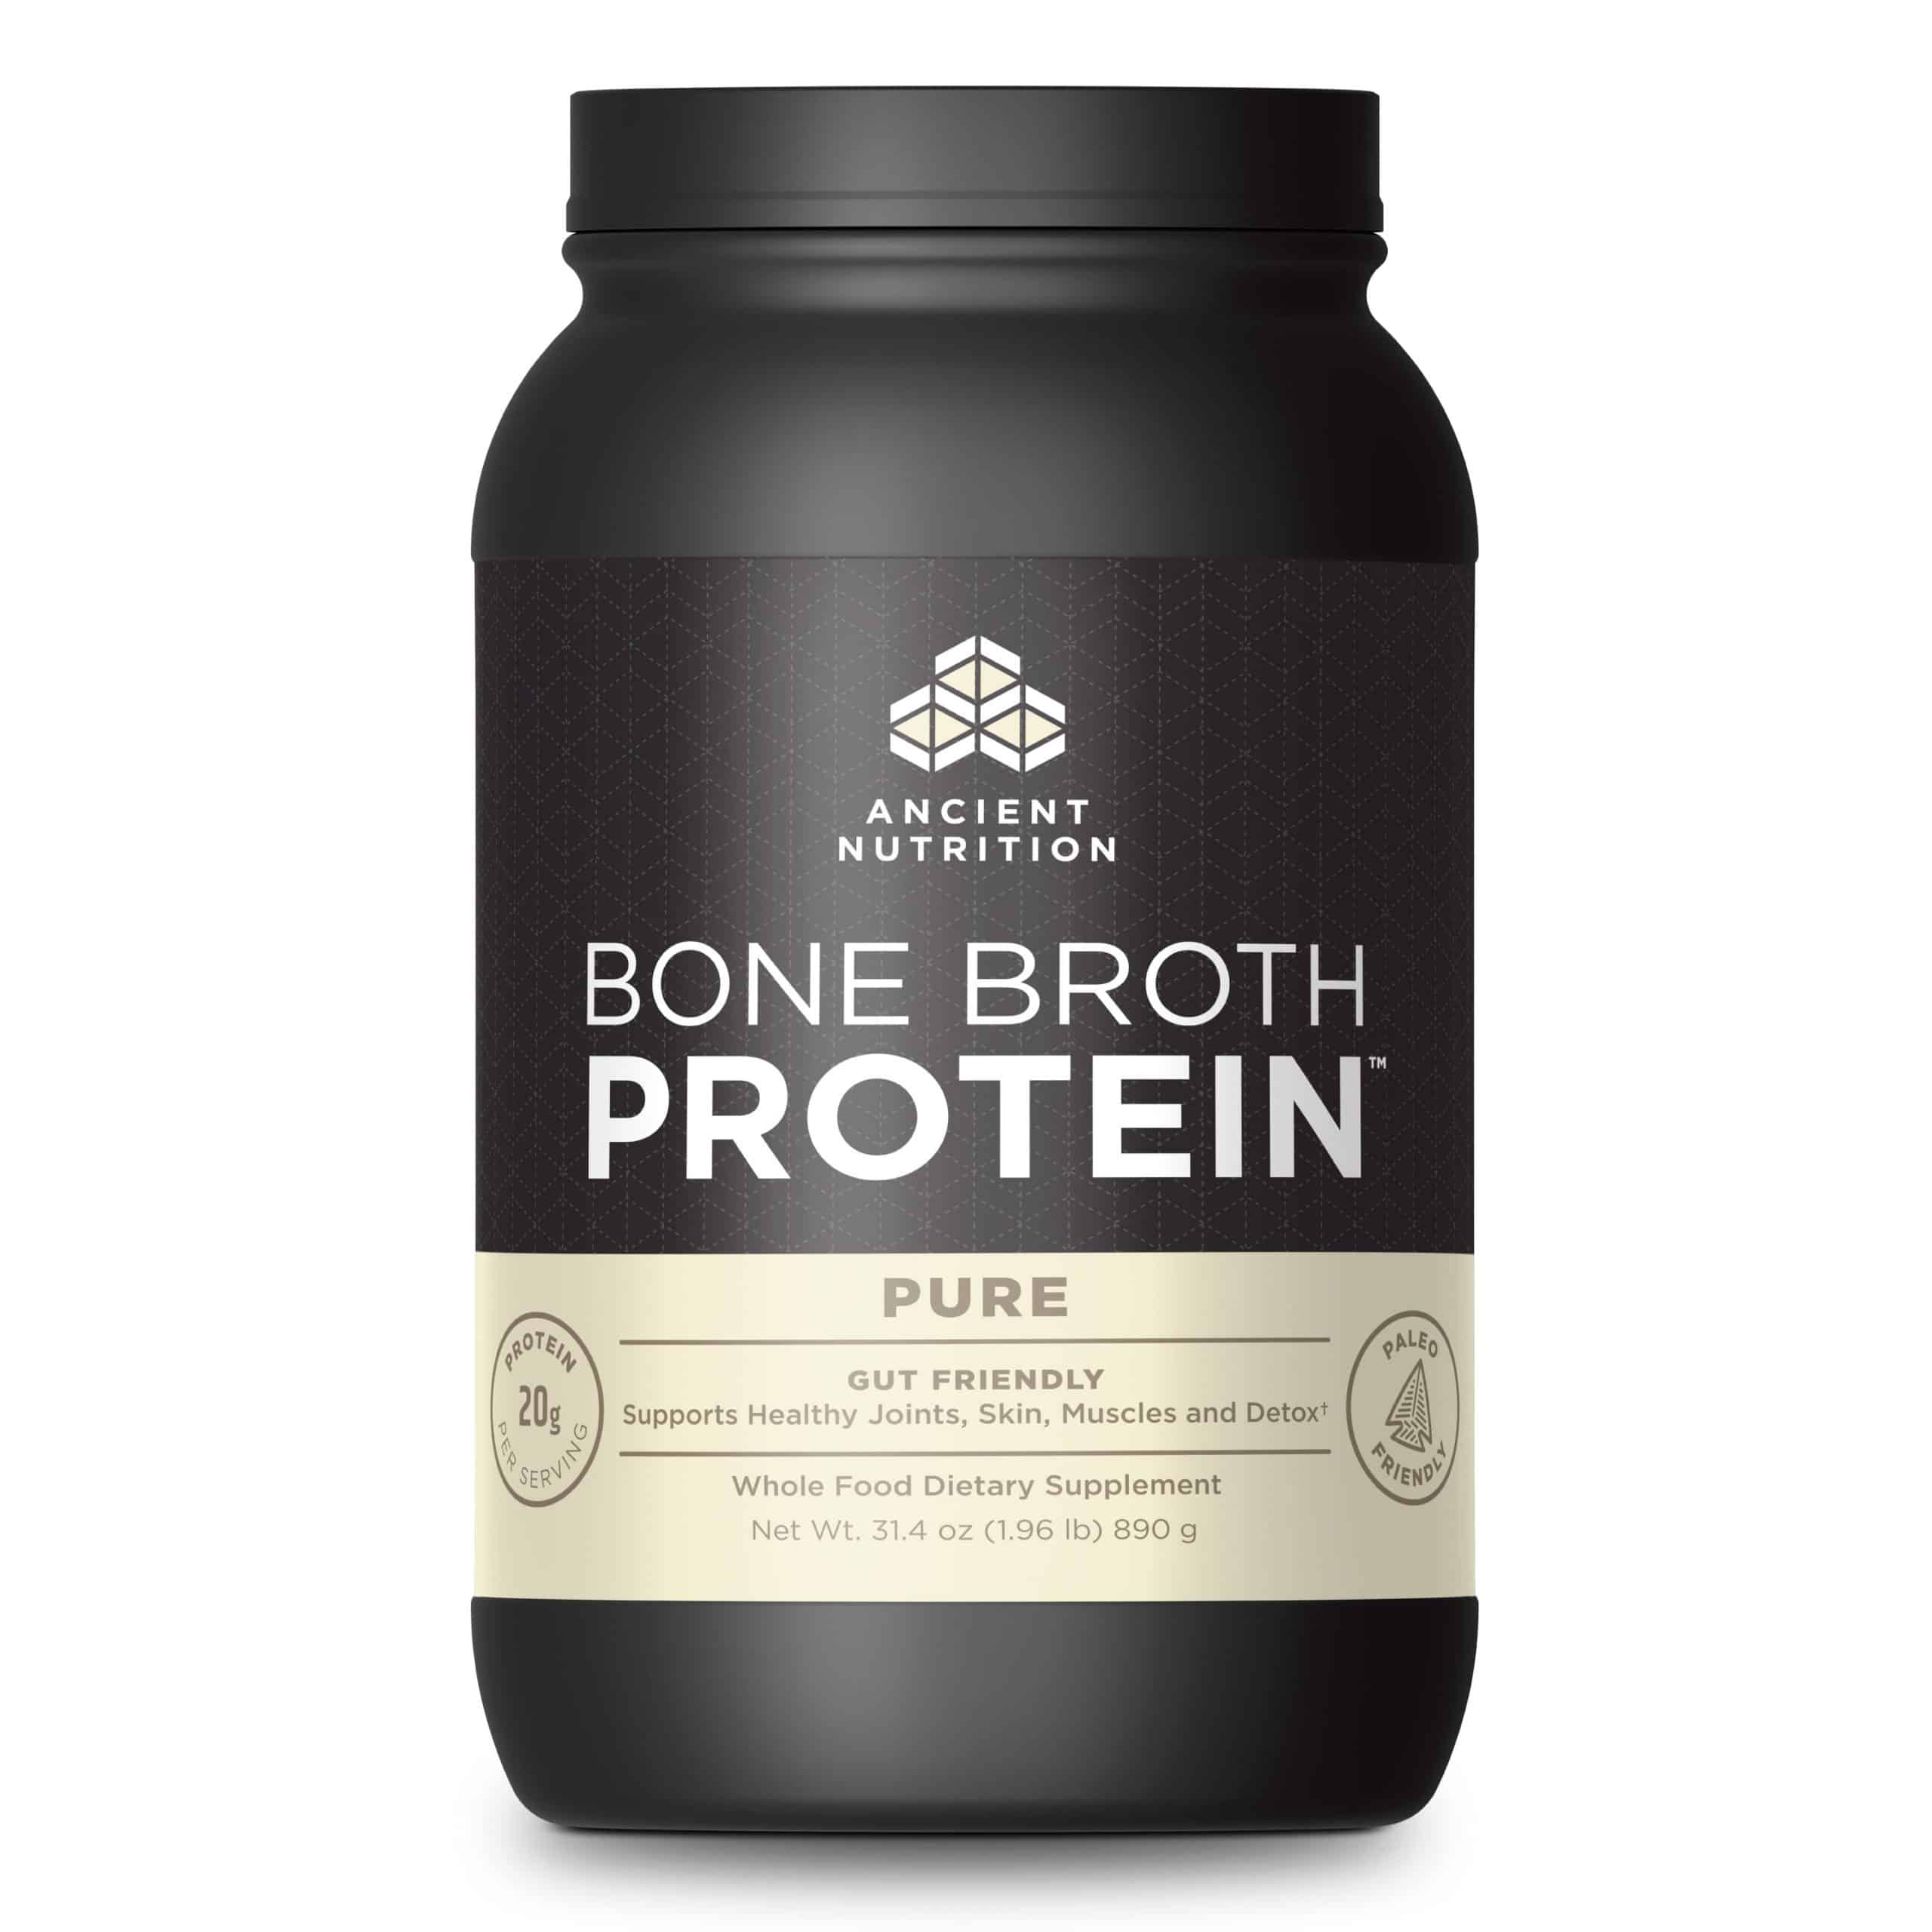 Ancient Nutrition, Bone Broth Protein, Pure, 40 Servings